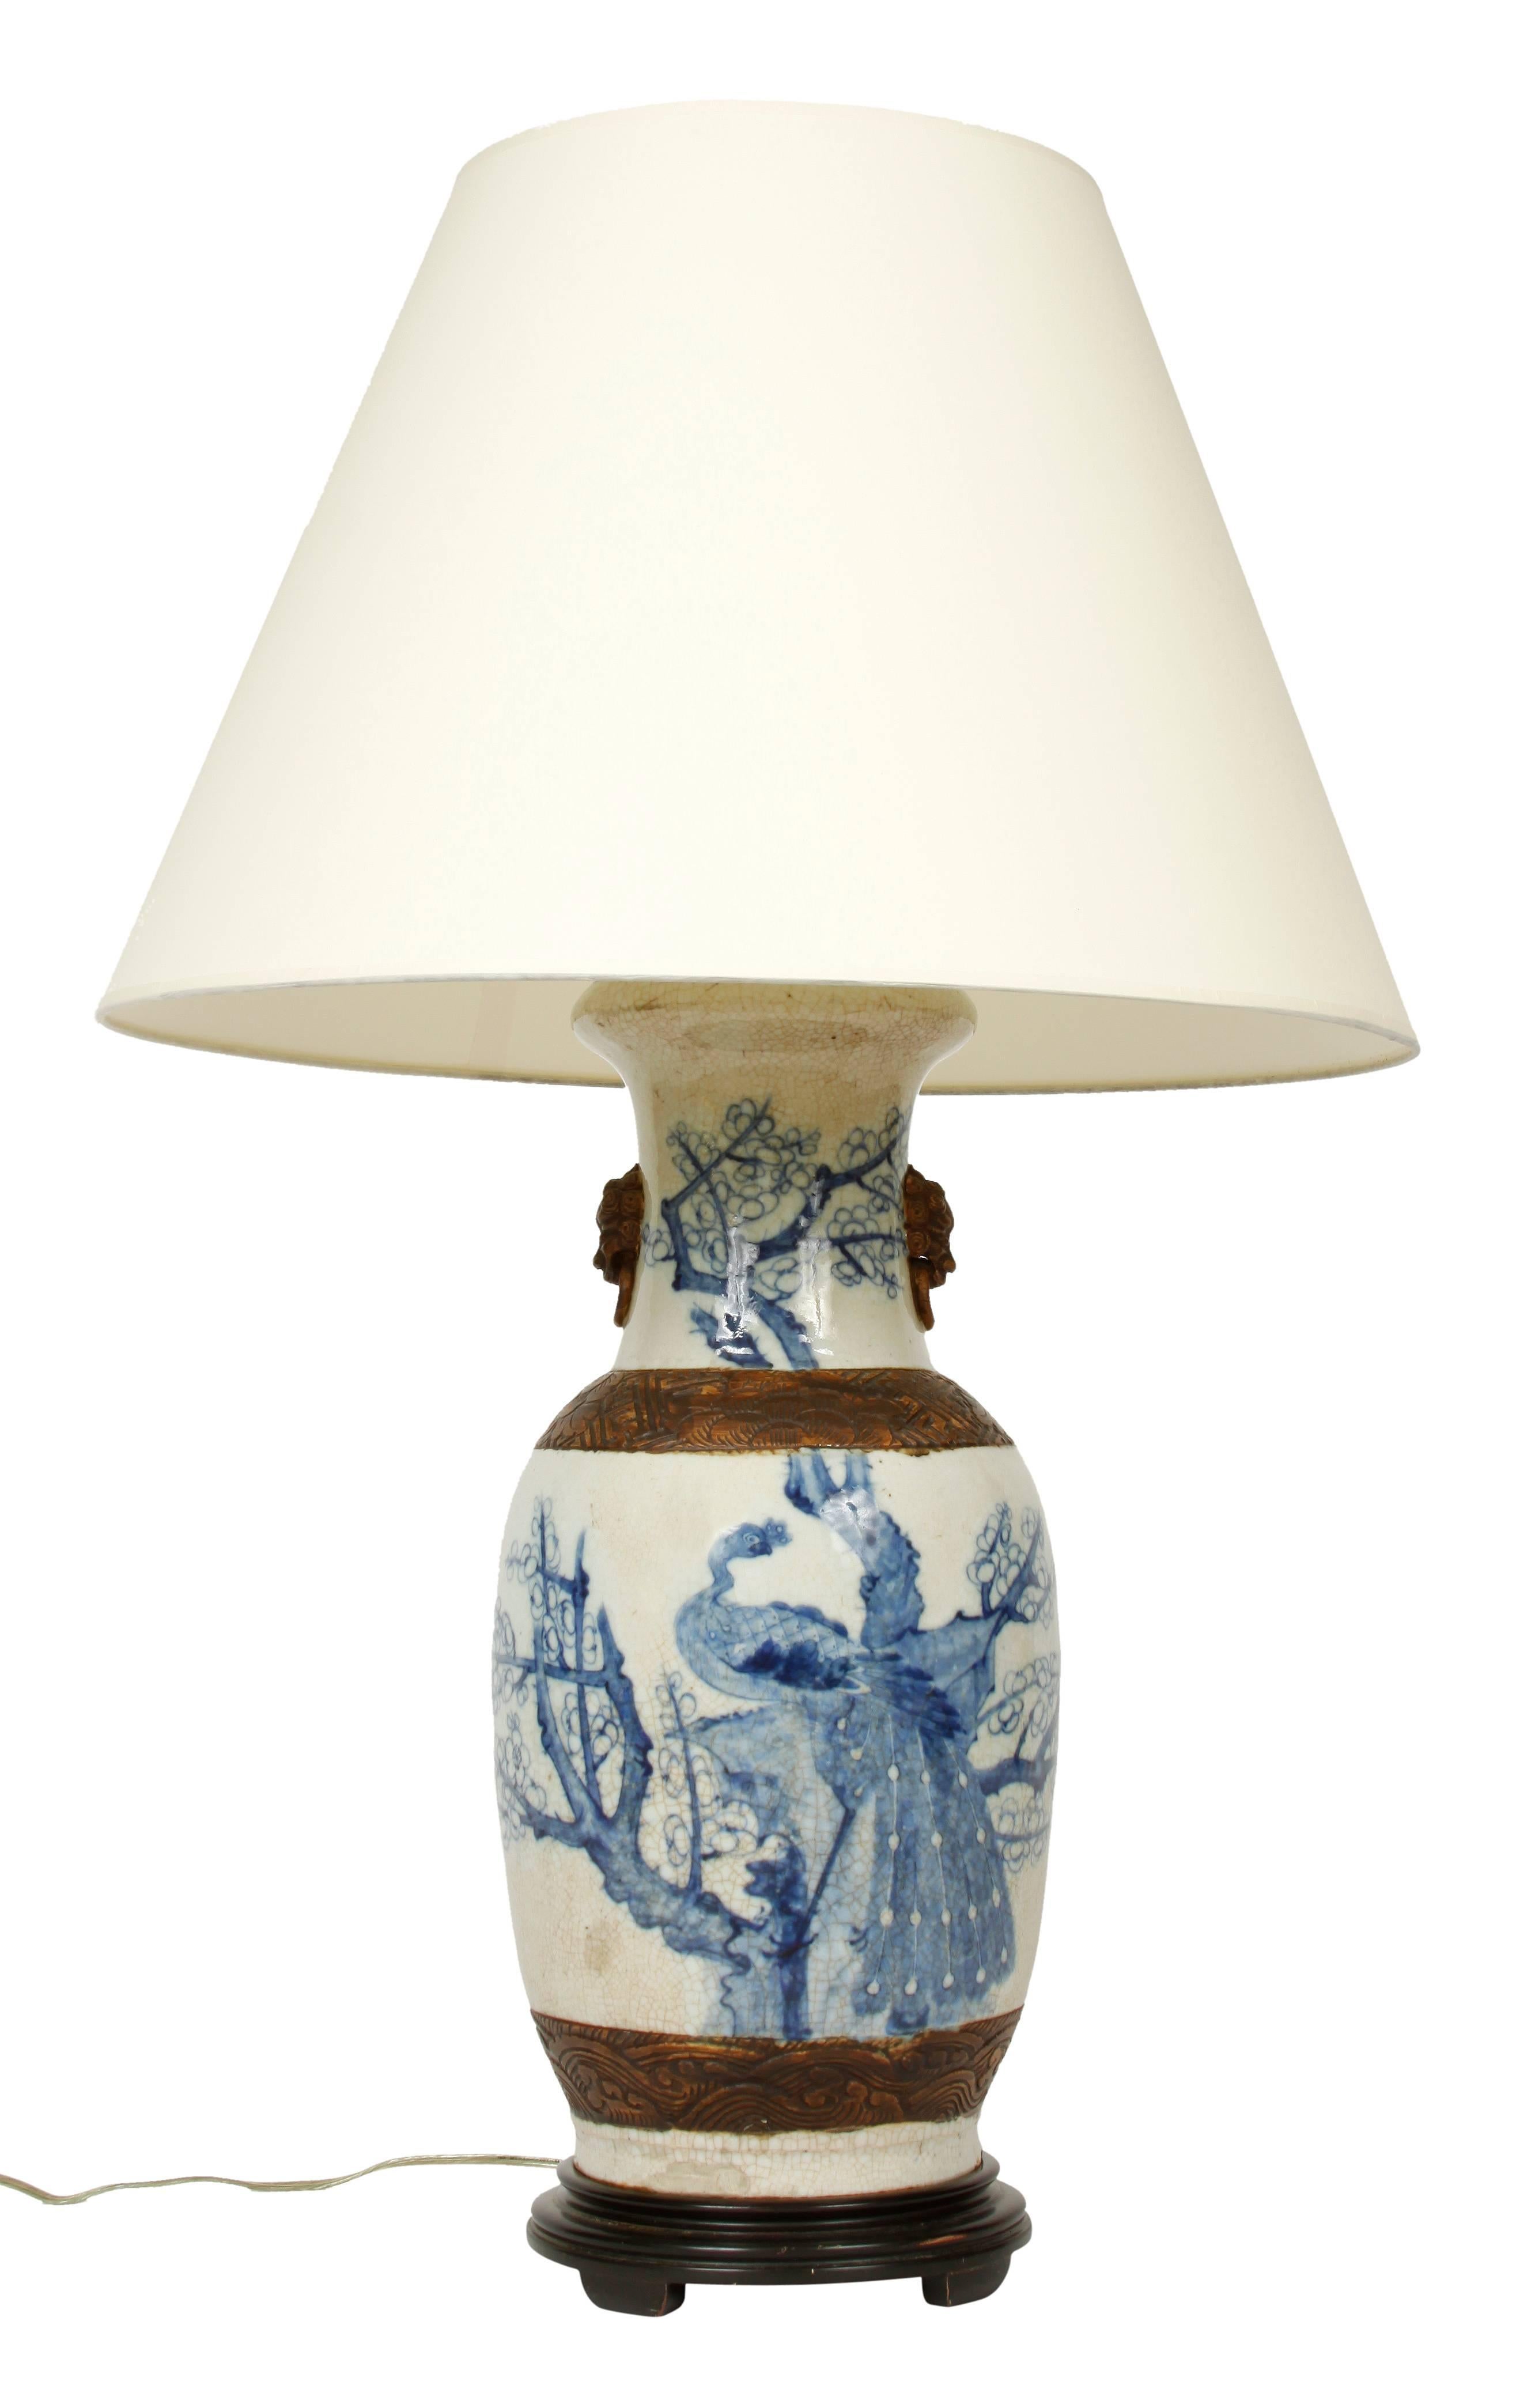 A pair of vintage Chinese export lamps. Porcelain lamps with metal details on wooden bases. Similar motifs of peacocks and flowers; each lamp is hand-painted and the design differs slightly.
 